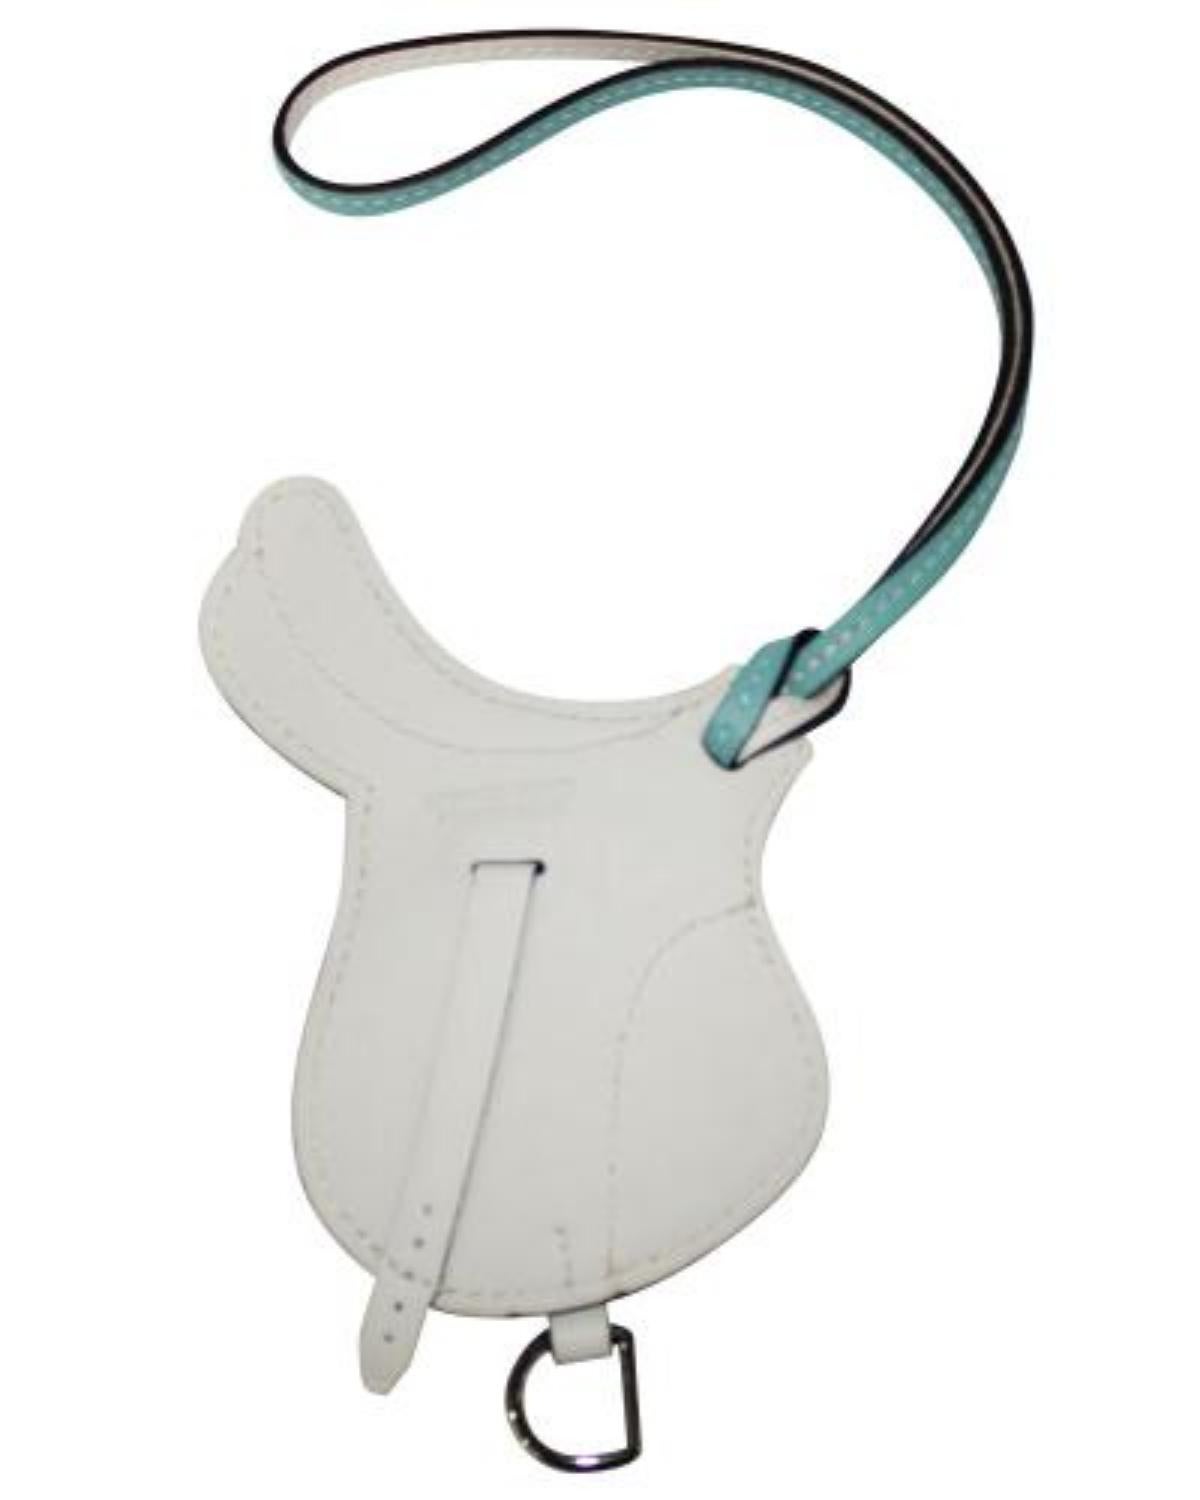 Hermes Swift Leather Bleu Atoll/Blanc Paddock Selle Charm

Saddle charm in Swift calfskin with palladium plated buckle

Dimensions: L 7.5 x H 11 x D 0.3 cm

Made in France. Excellent condition- no signs of usage. 
Comes with original box. 
Color: